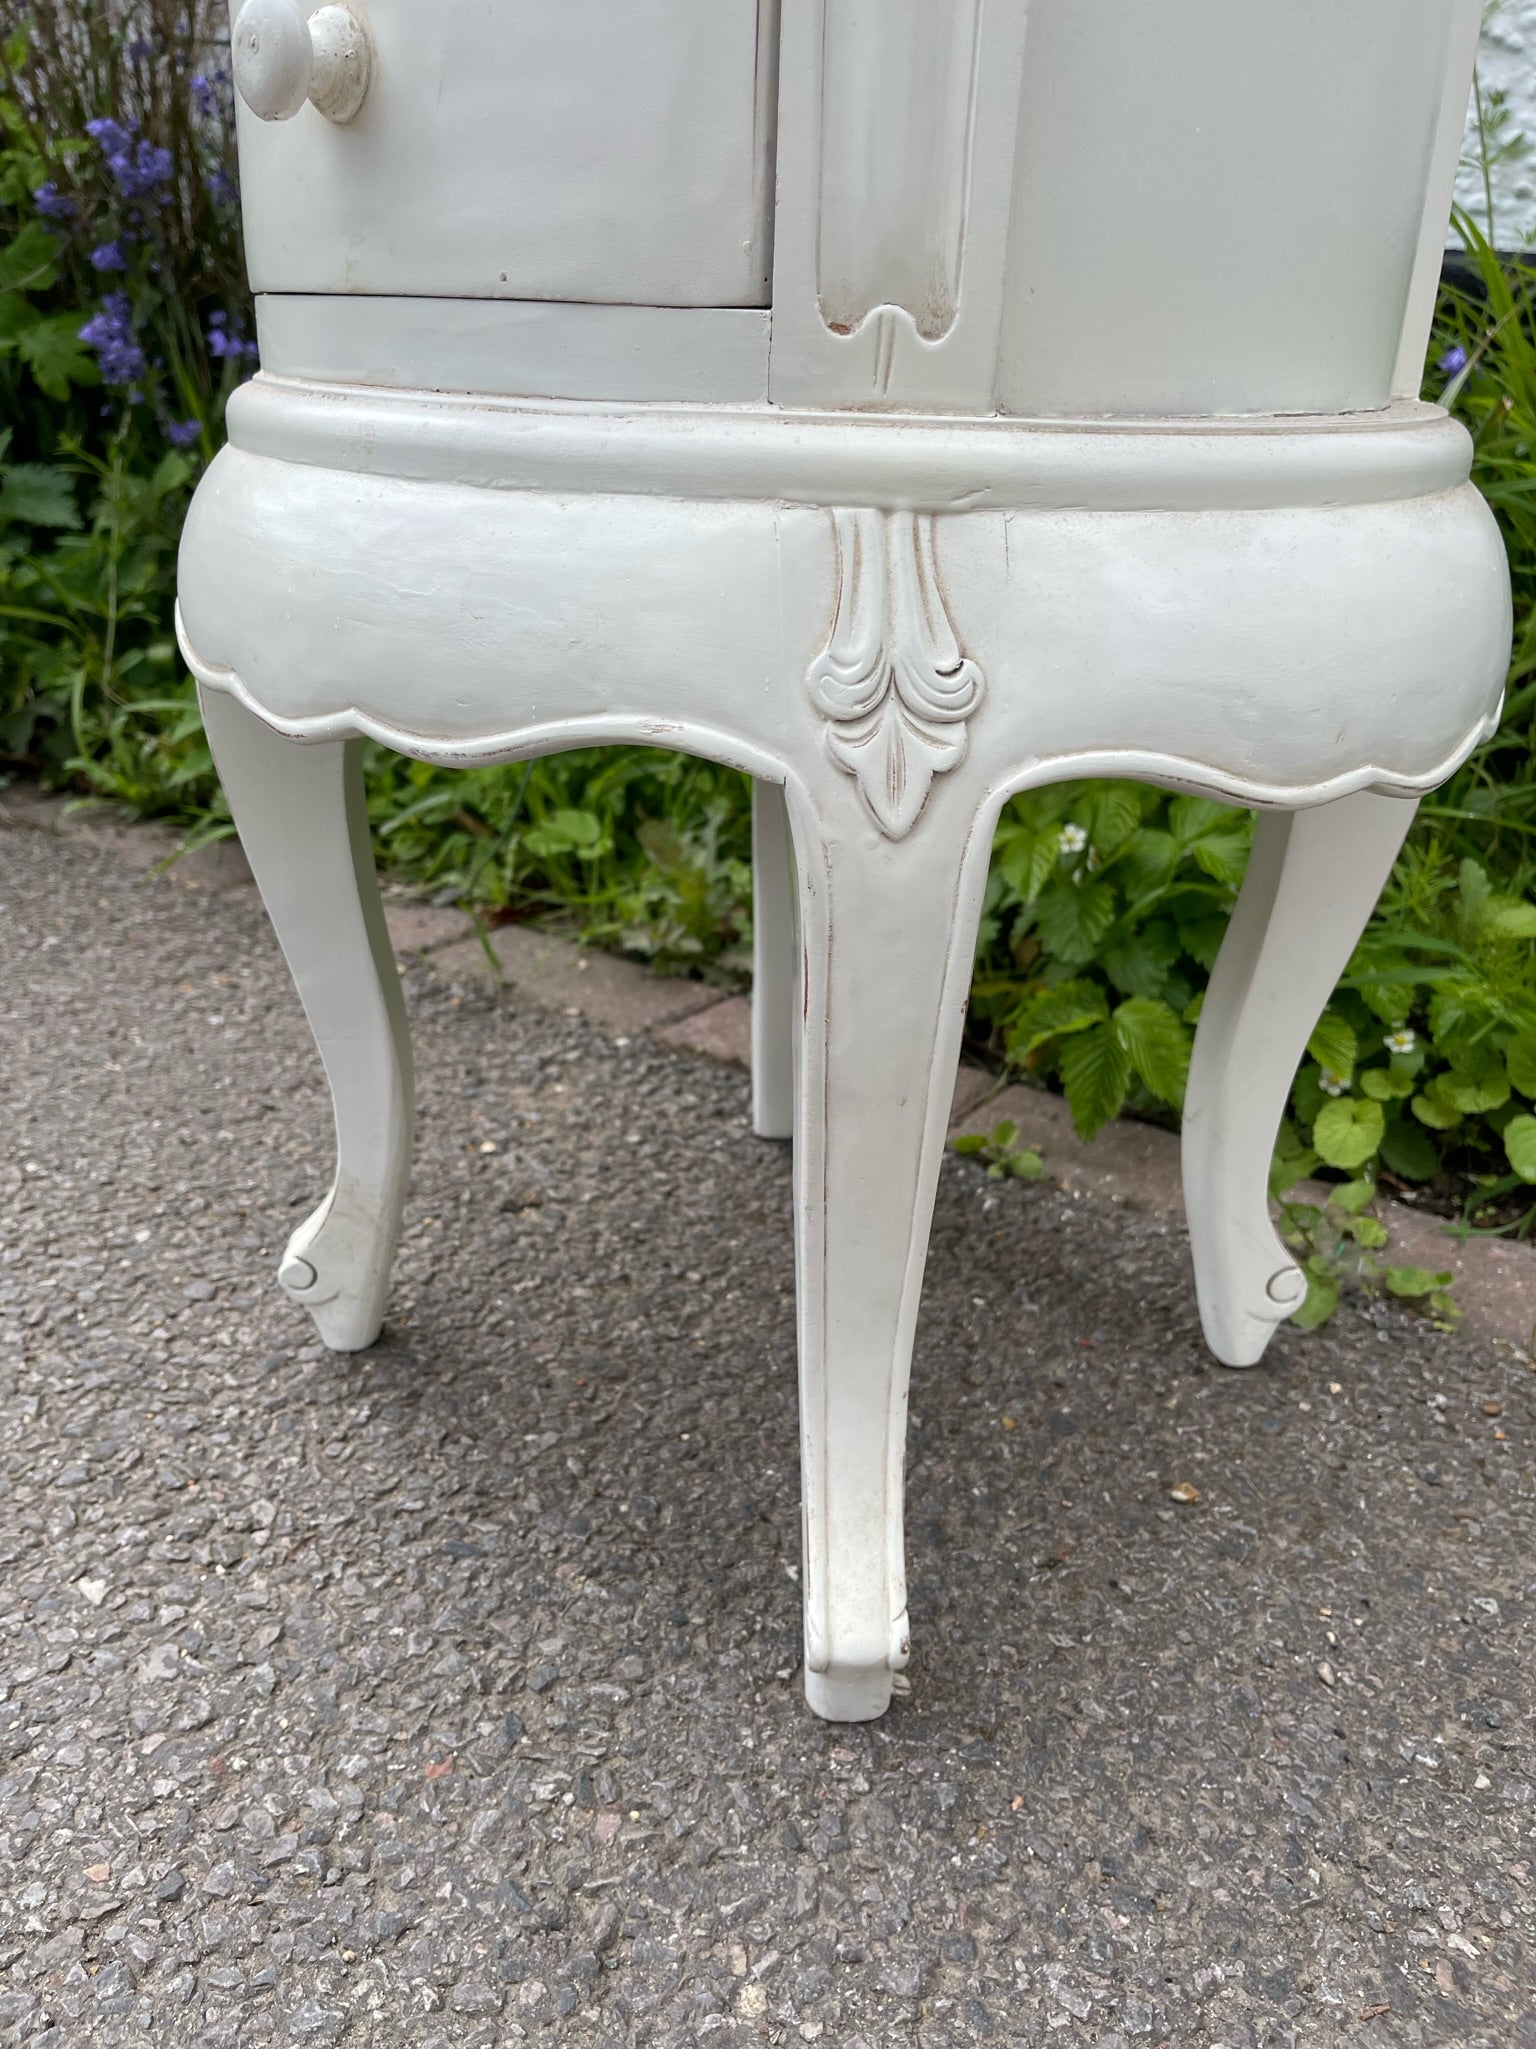 Pair of White Ornate Side Tables